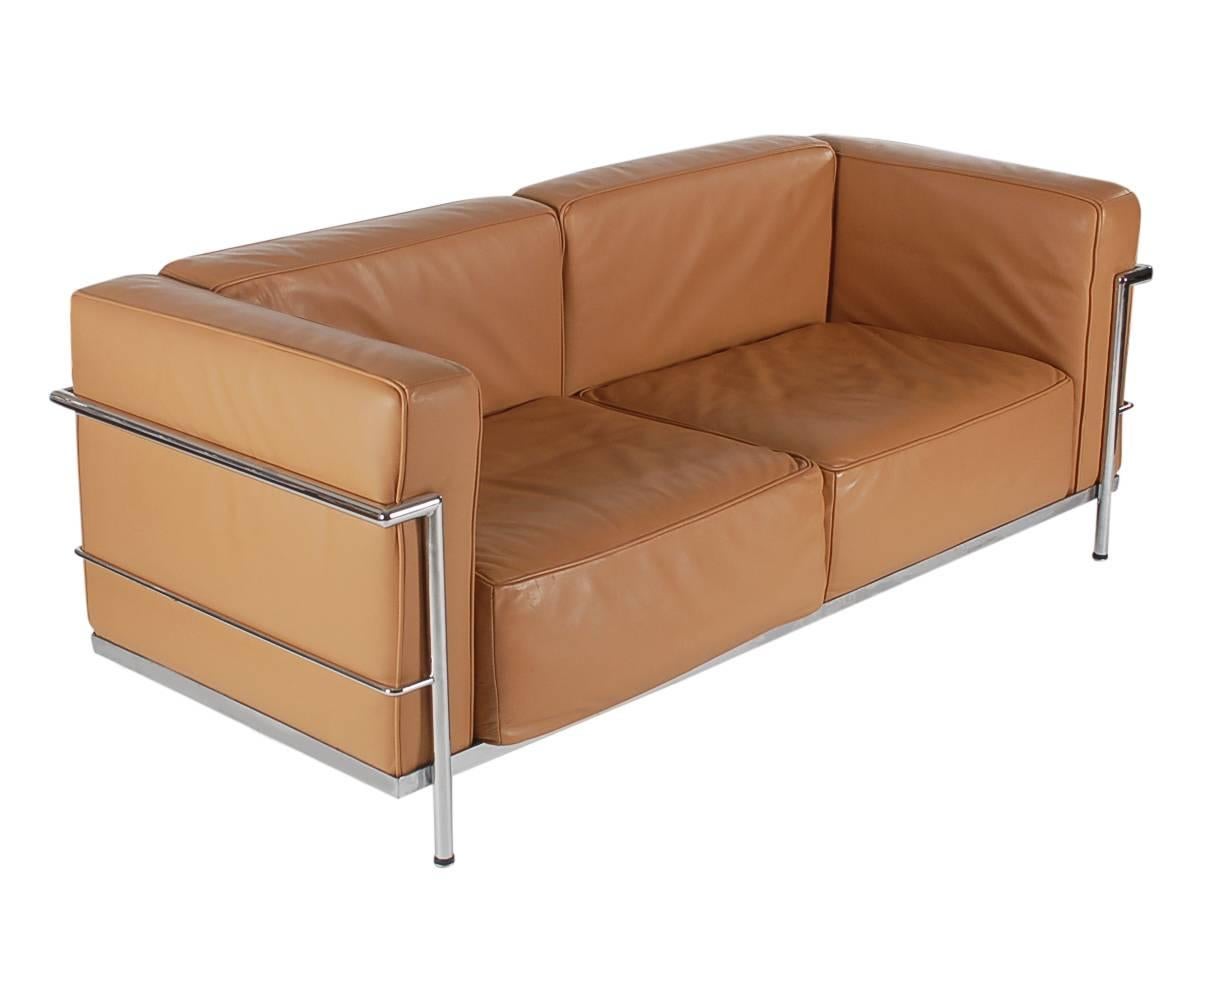 Late 20th Century Mid-Century Modern Pair of Tan Leather Sofas in the Style LC2 Corbusier Cassina 